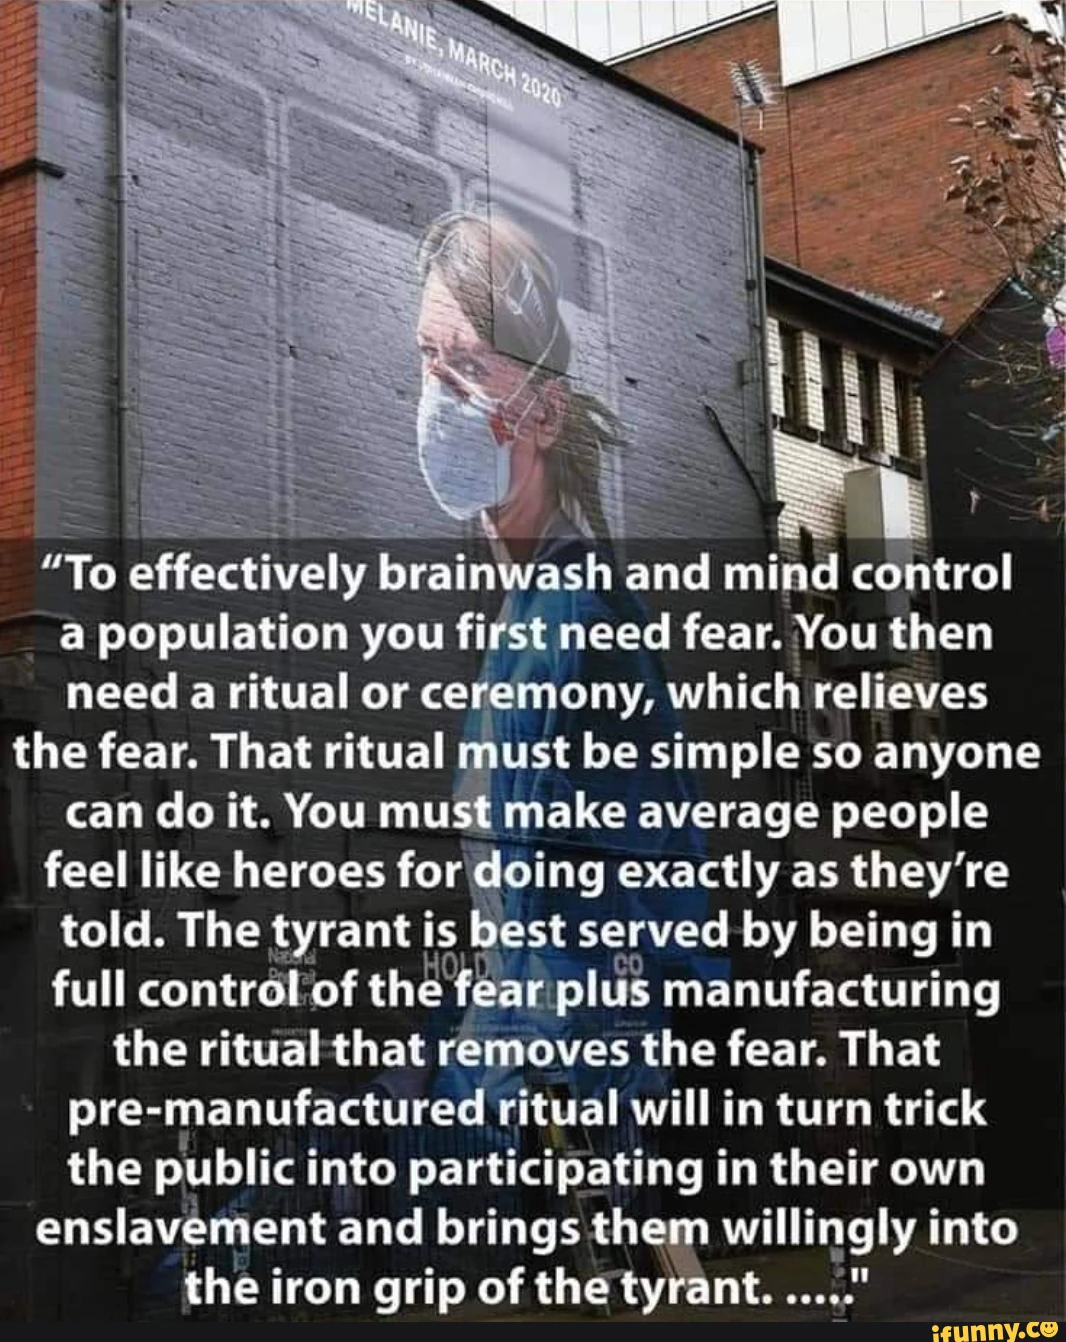 "To effectively brainwash and mind control a population you first need fear. You then need a ritual or ceremony, which relieves the fear. That ritual must be simple so anyone can do it. You must make average people feel like heroes for doing exactly as they're told. The tyrant is best served by being in full control of the fear plus manufacturing the ritual that removes the fear. That pre-manufactured ritual will in turn trick the public into participating in their own enslavement and brings them willingly into the iron grip of the tyrant.